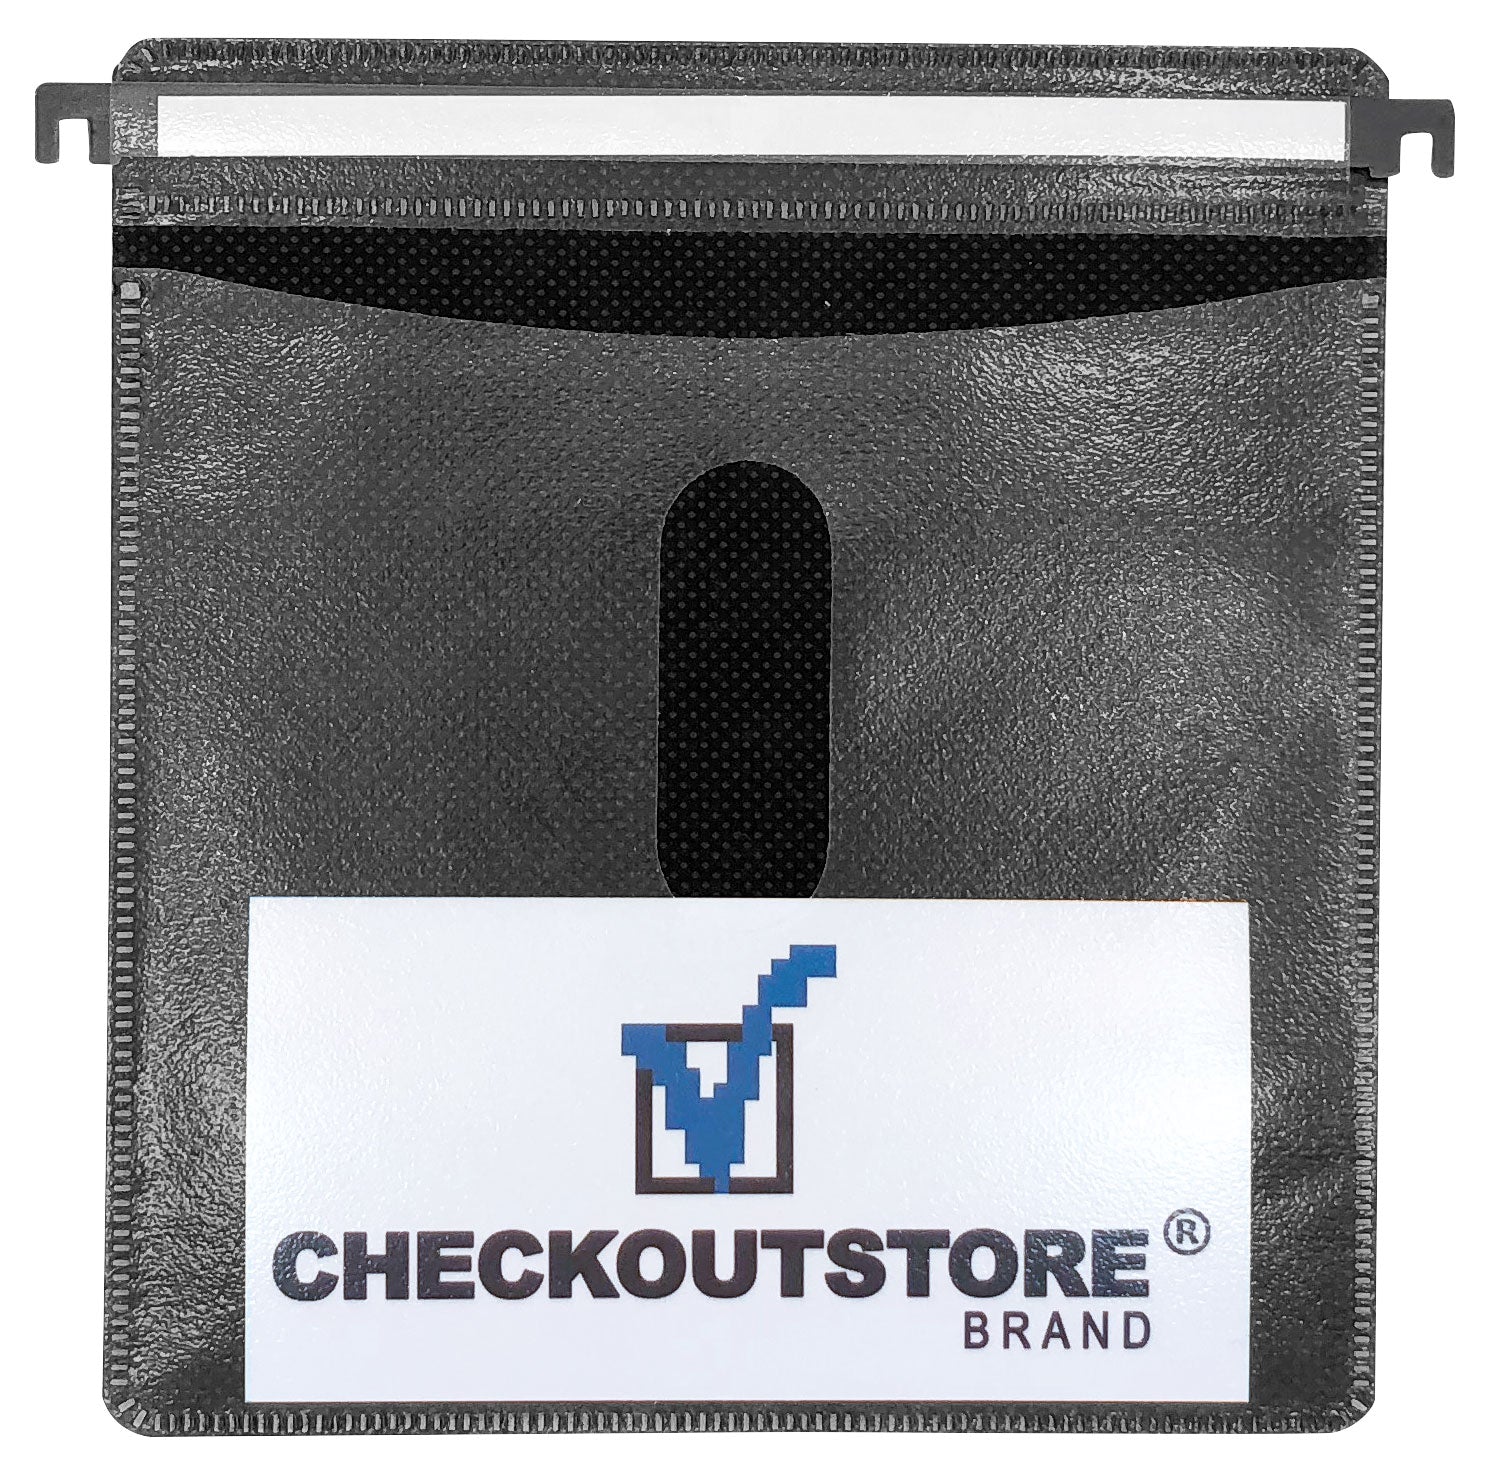 100 CheckOutStore® CD Double-sided Refill Plastic Hanging Sleeve - Black